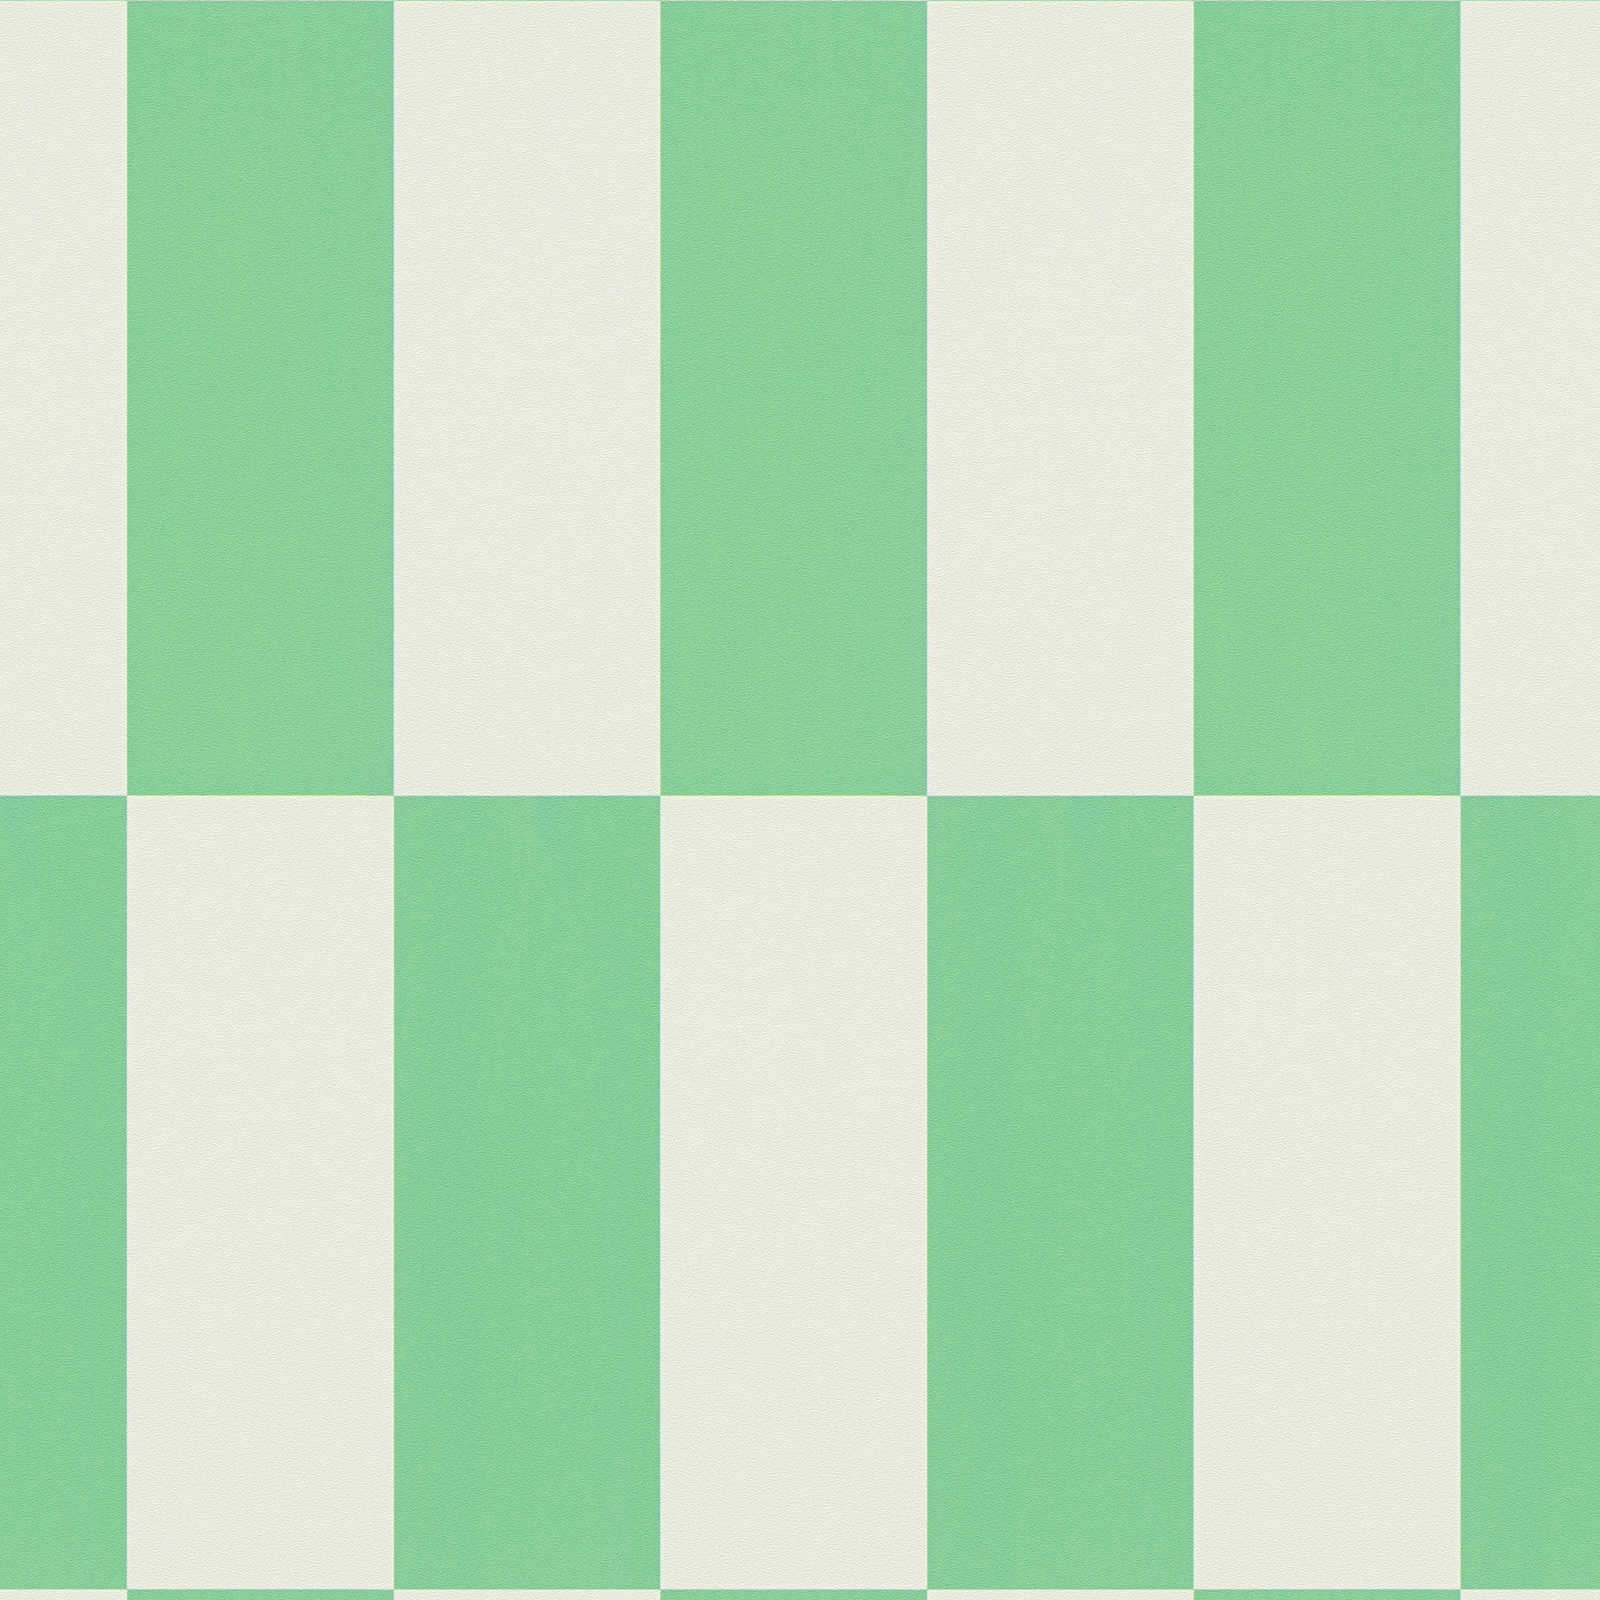             Pattern wallpaper with squares graphic pattern - green, white
        